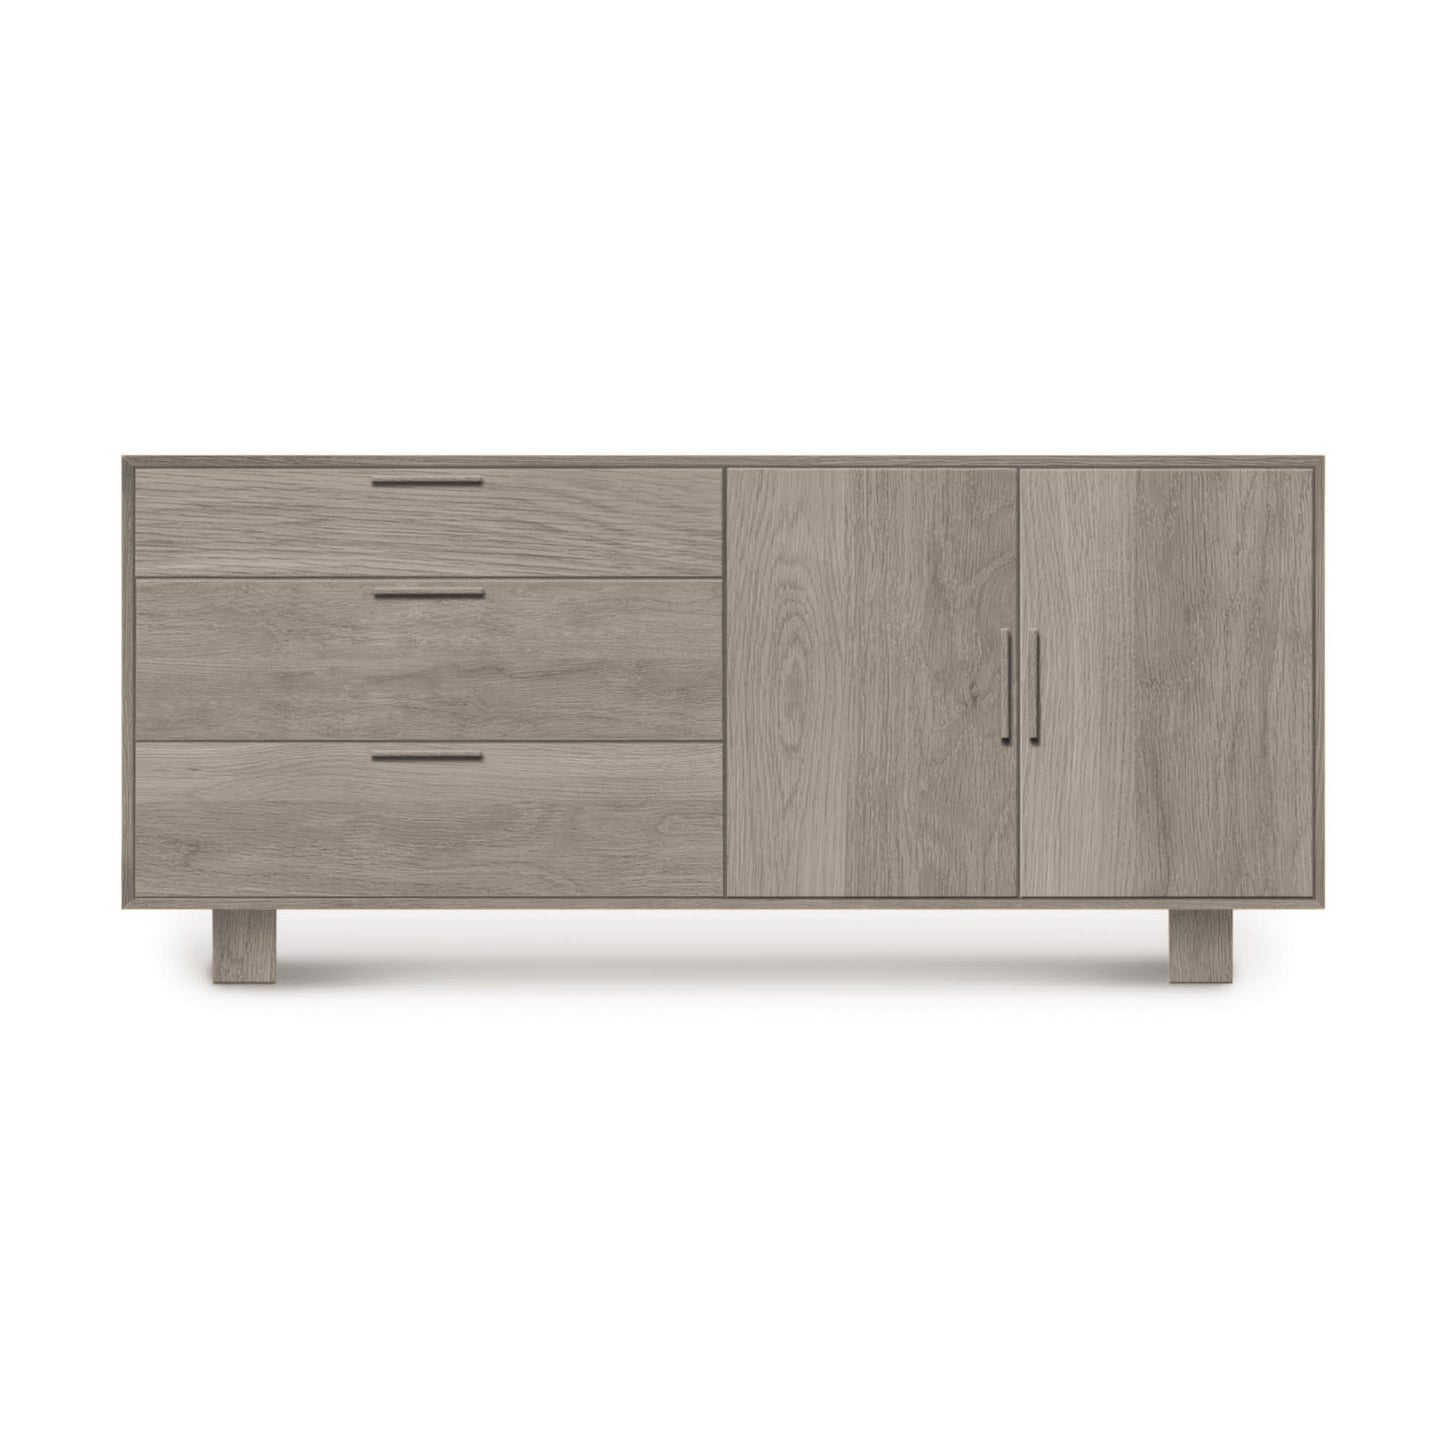 Modern Copeland Furniture Iso 2 Door, 3 Side Drawer Buffet standing on short legs against a white background.